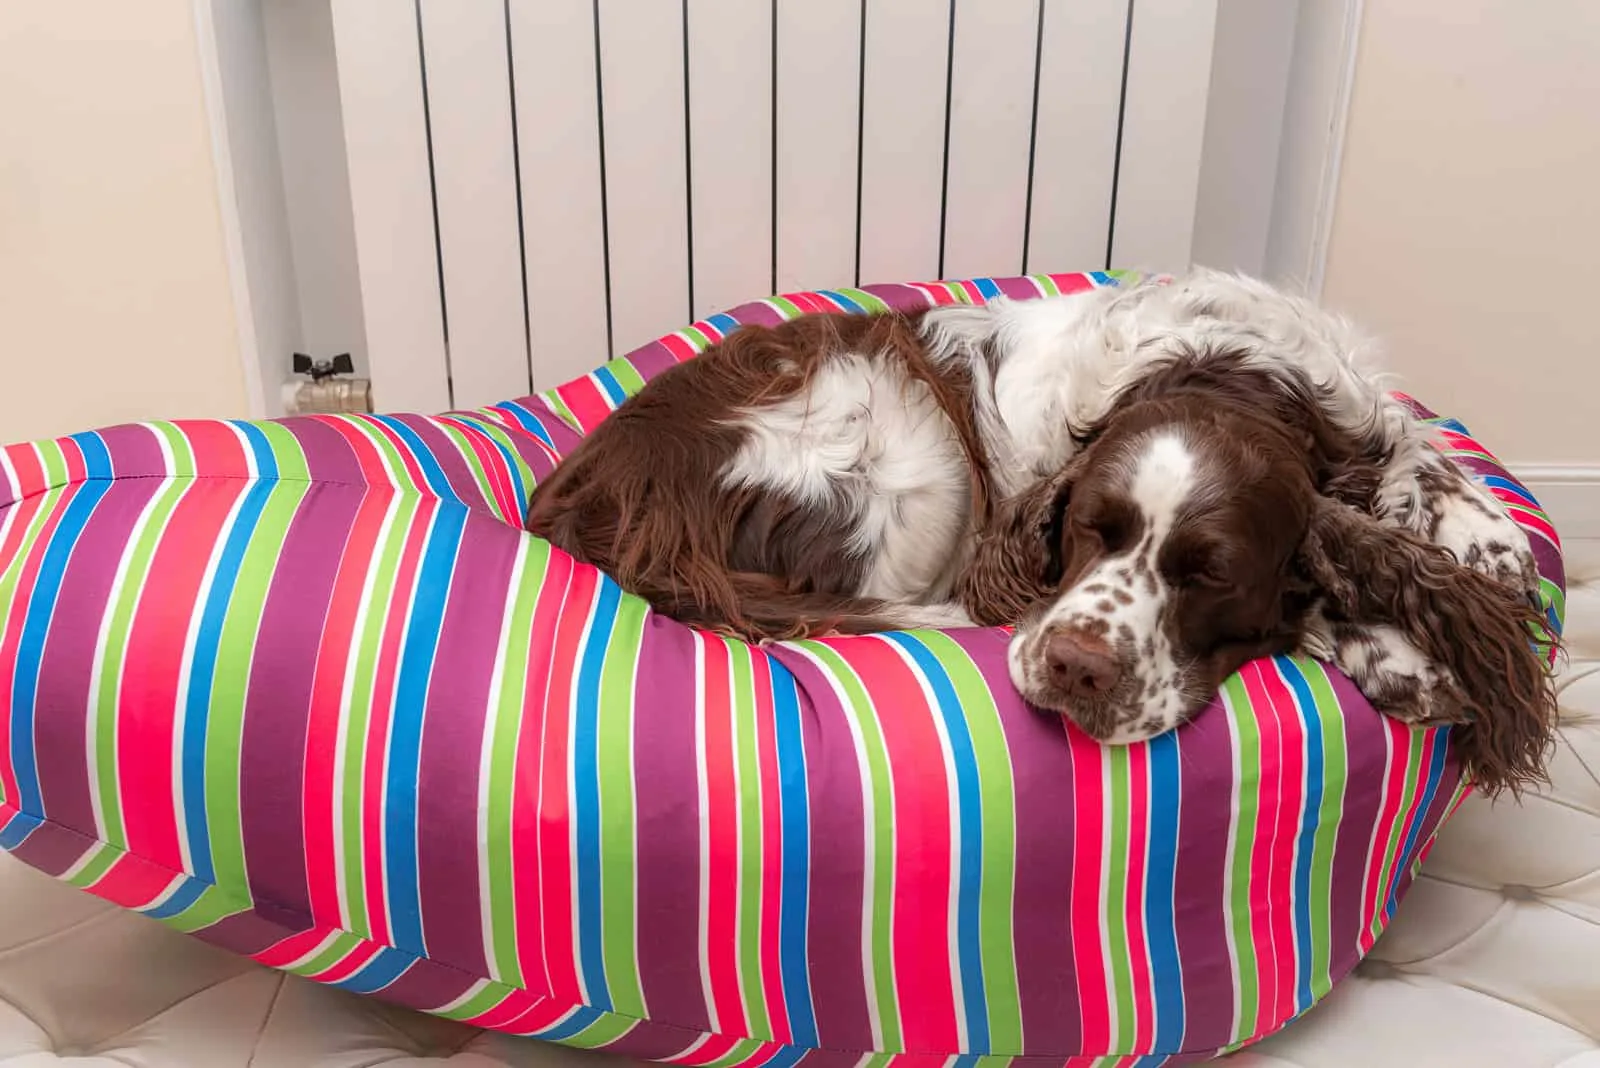 The English Springer Spaniel is lying on its bed